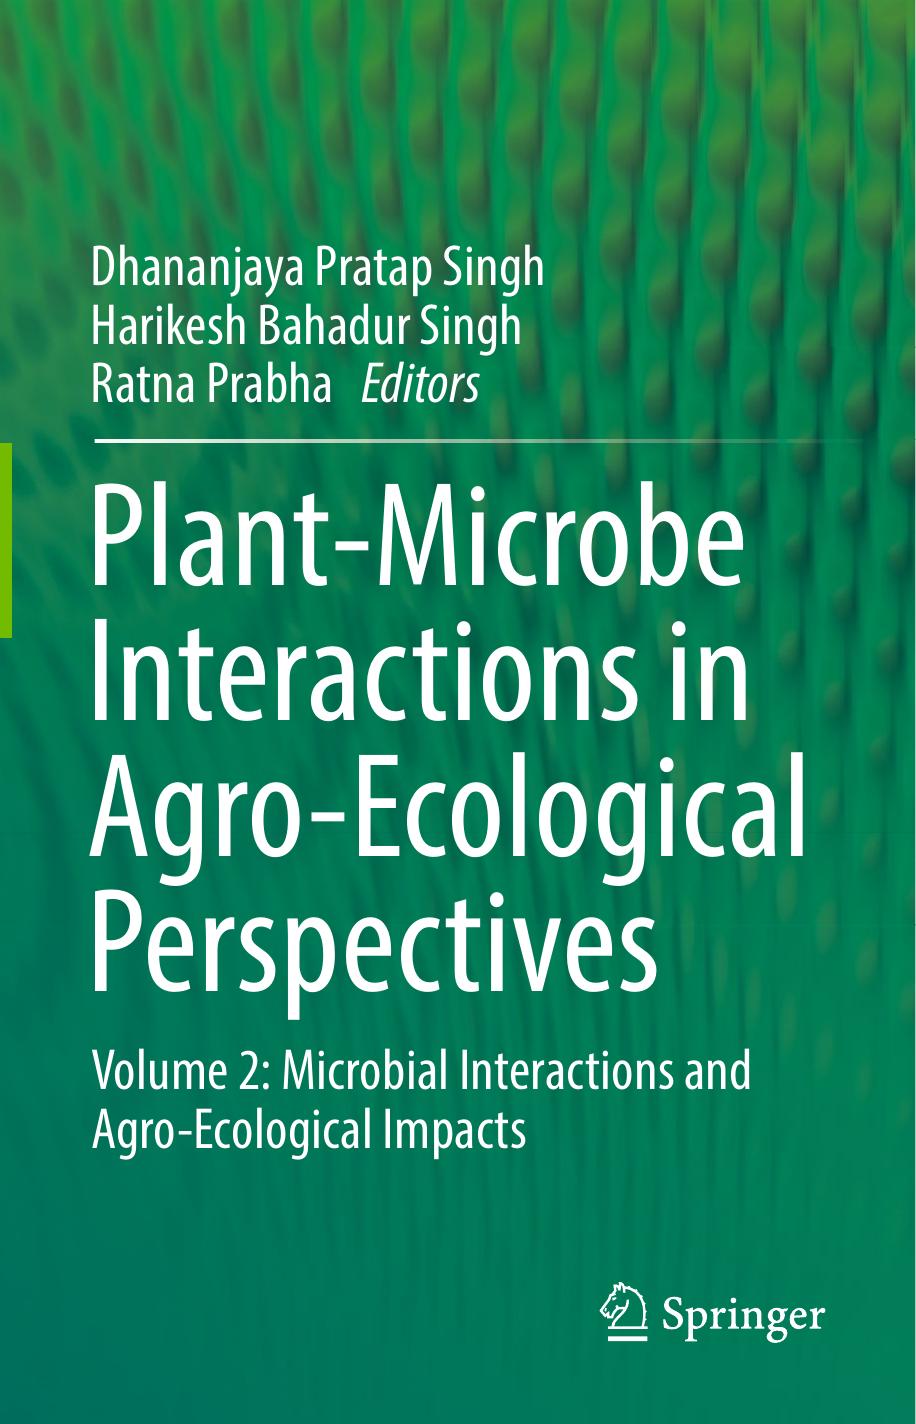 Plant-Microbe Interactions in Agro-Ecological Perspectives Volume 2,  2017